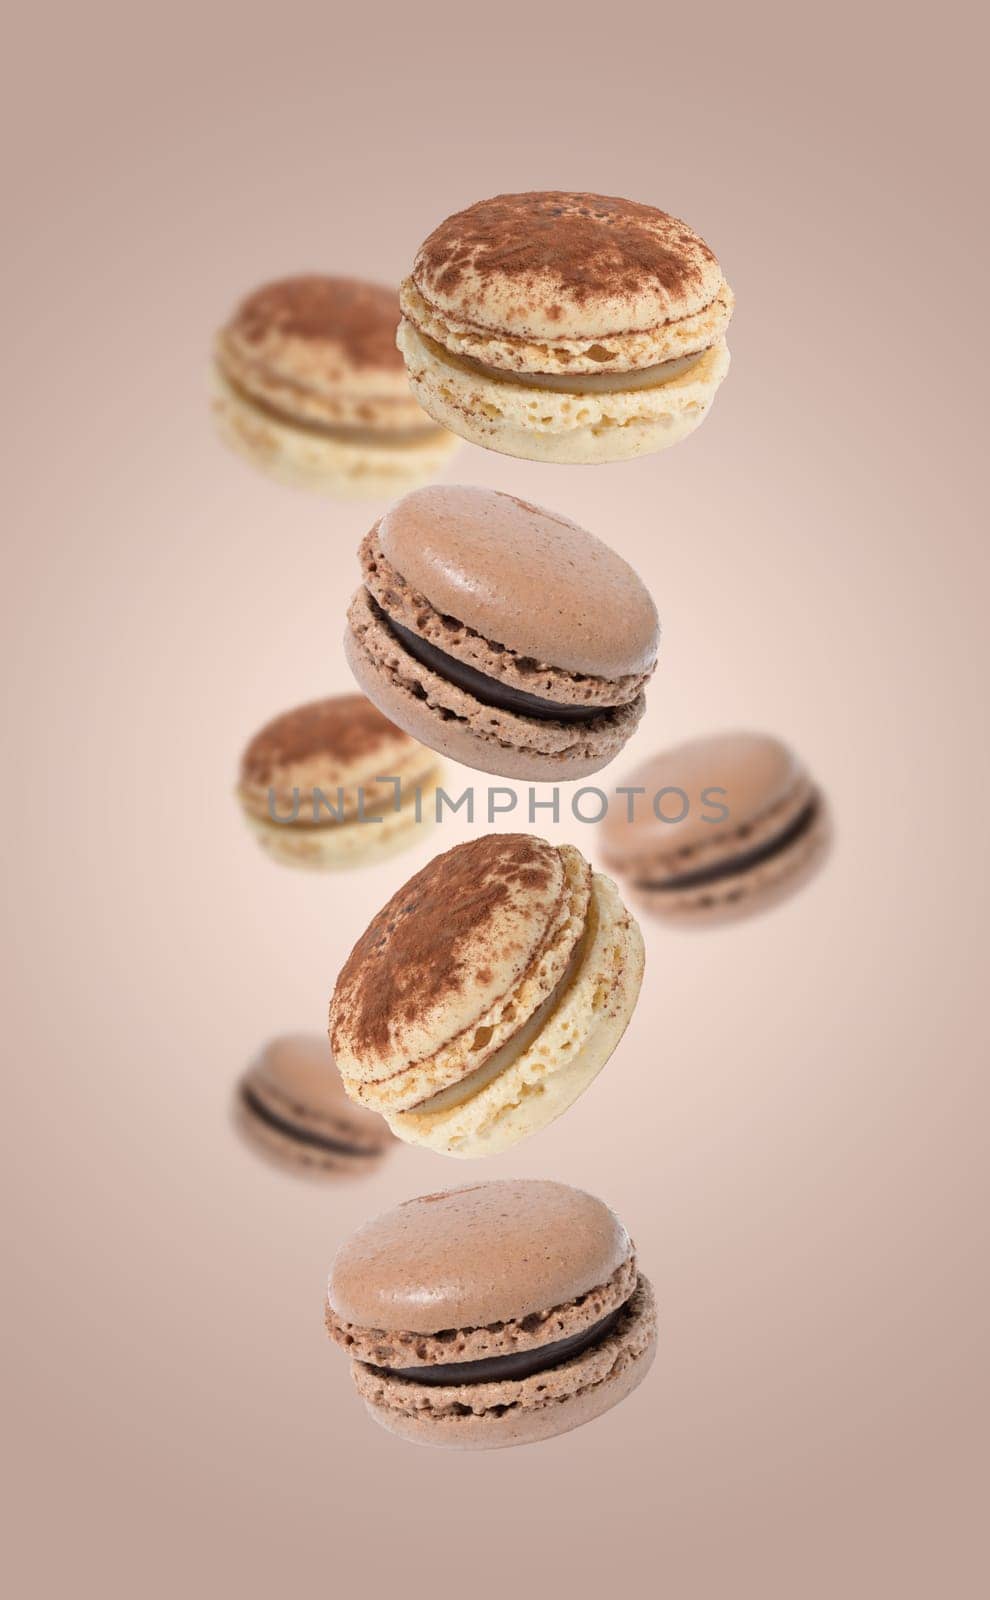 Chocolate macarons levitate on a light brown background, delicious dessert